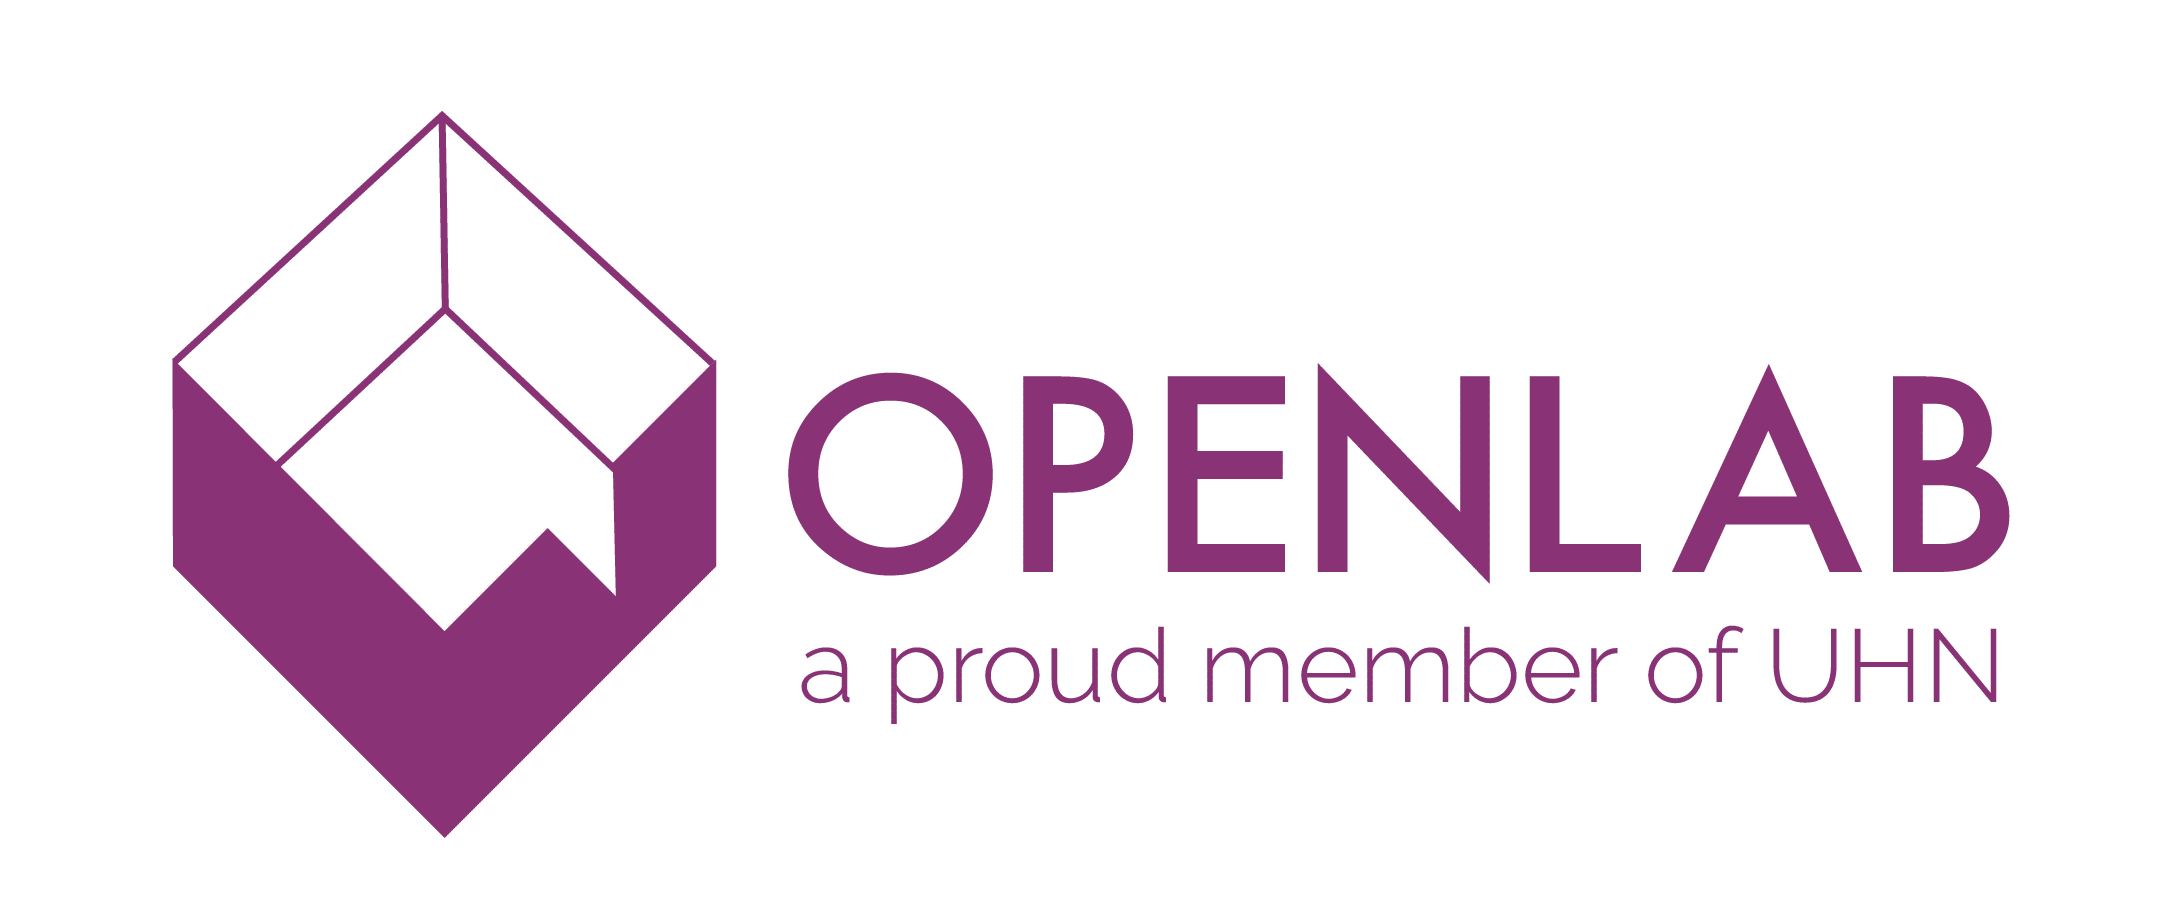 Graphic that reads "OPENLAB a proud member of UHN" in purple lettering